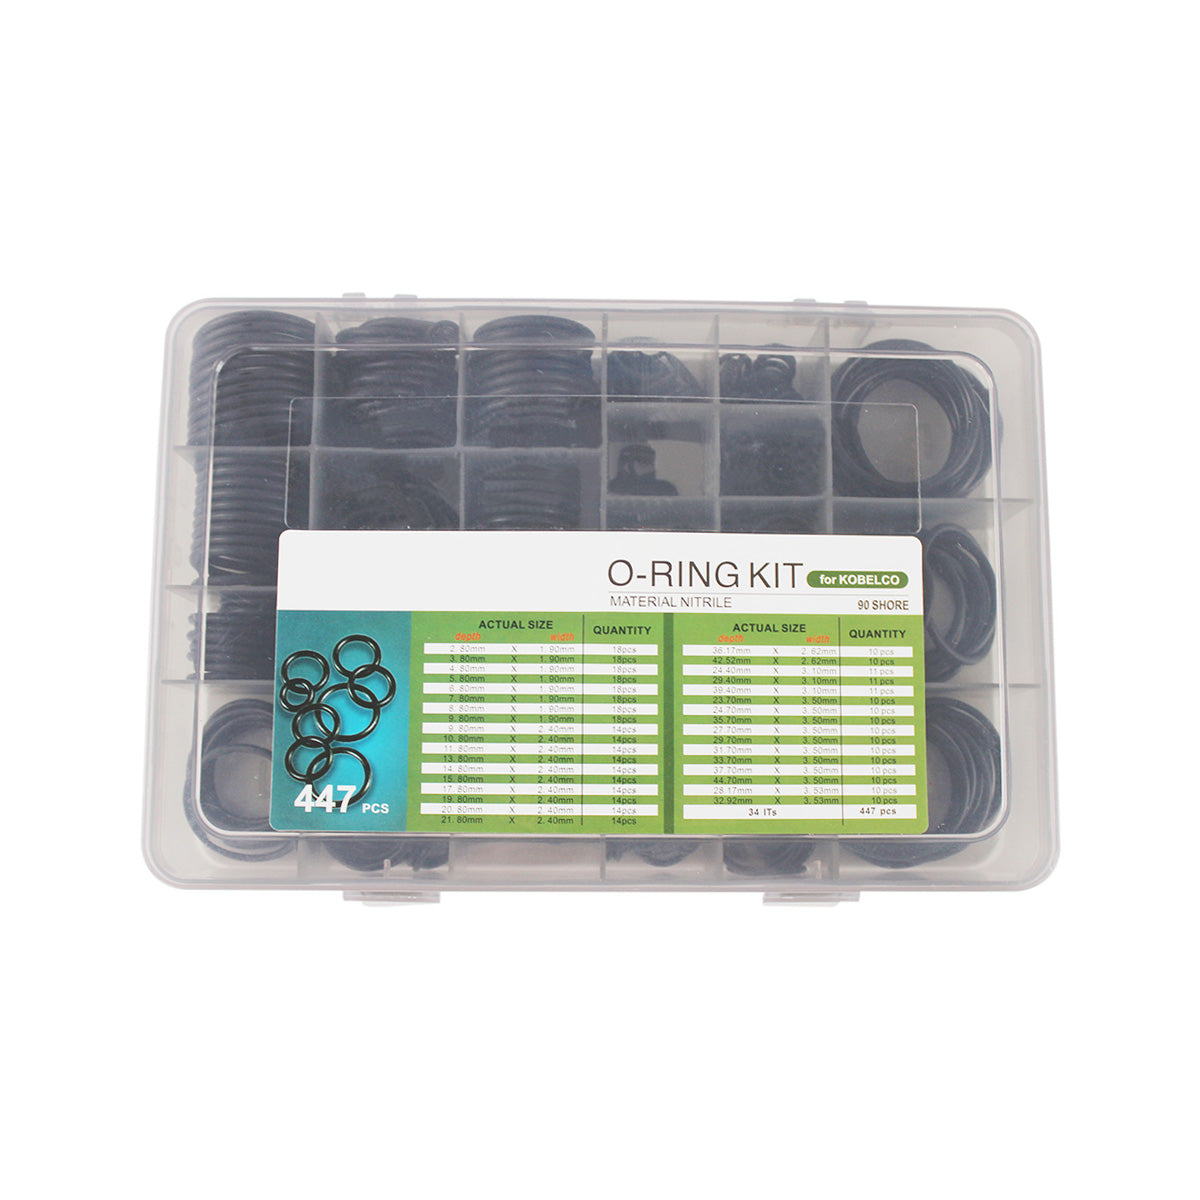 NEF O Ring Kit, Rubber Metric O-Ring Assortment, 32 Sizes, 419 Pieces:  Amazon.com: Industrial & Scientific